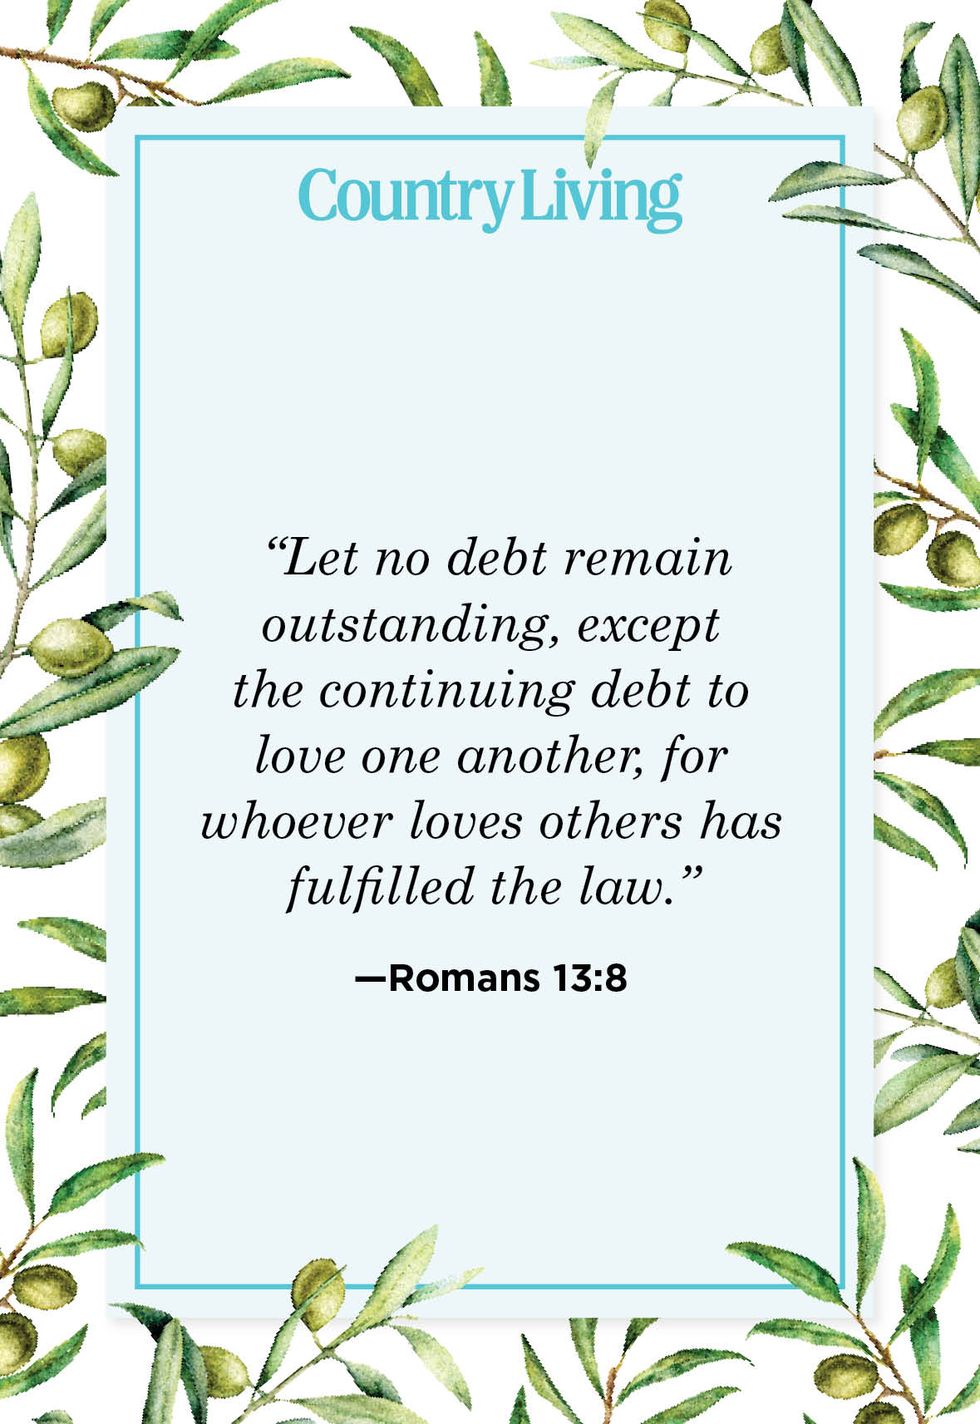 let no debt remain outstanding, except the continuing debt to love one another, for whoever loves others has fulfilled the law